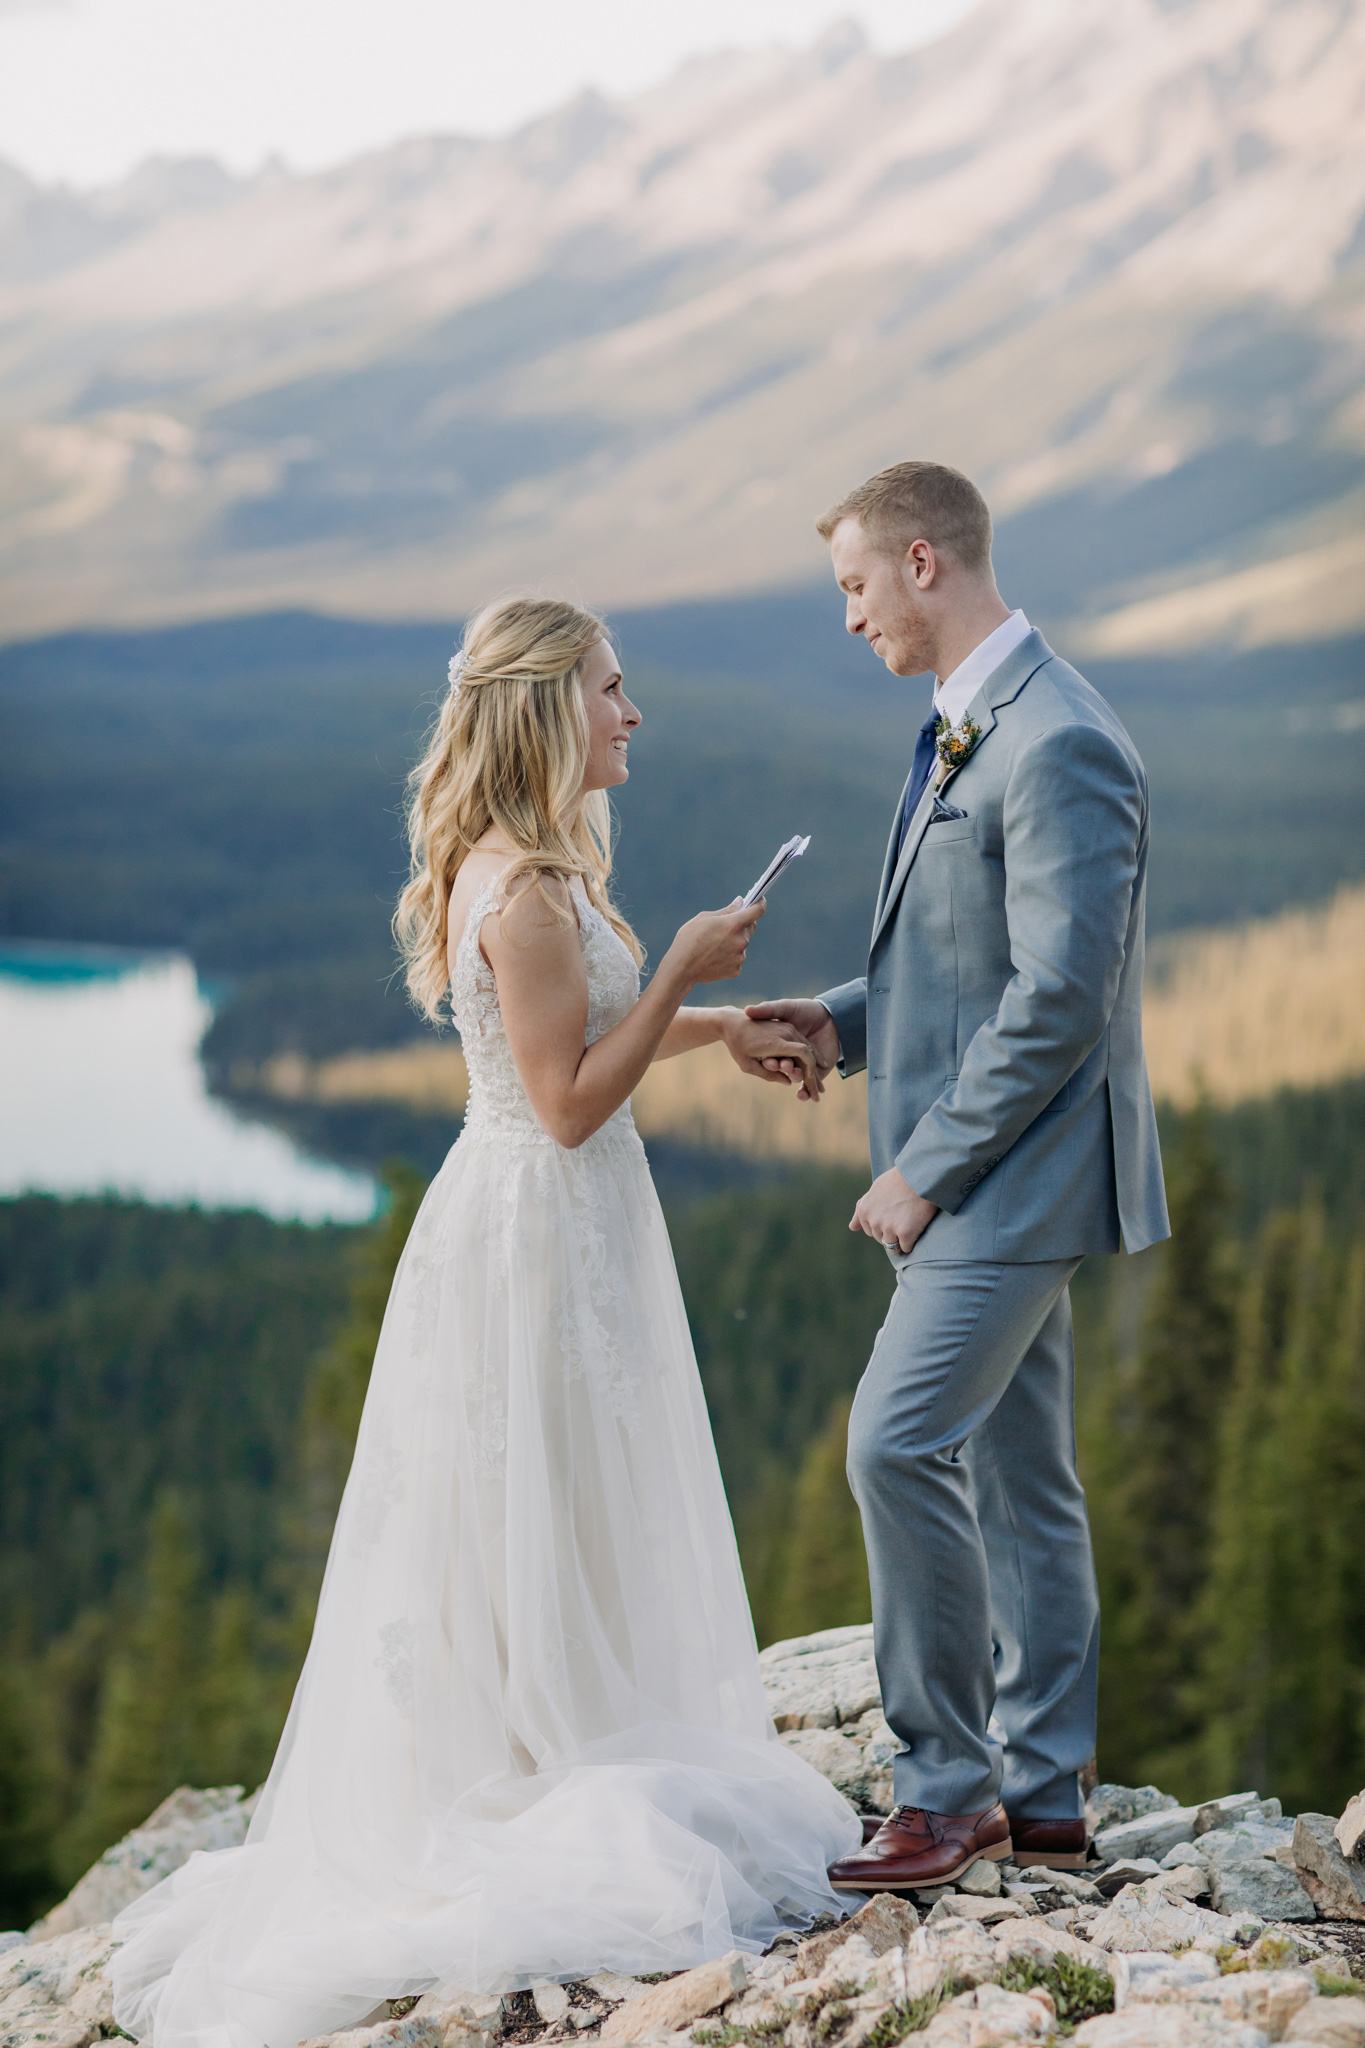 Why elope? Five reasons why running away to get married is the best!